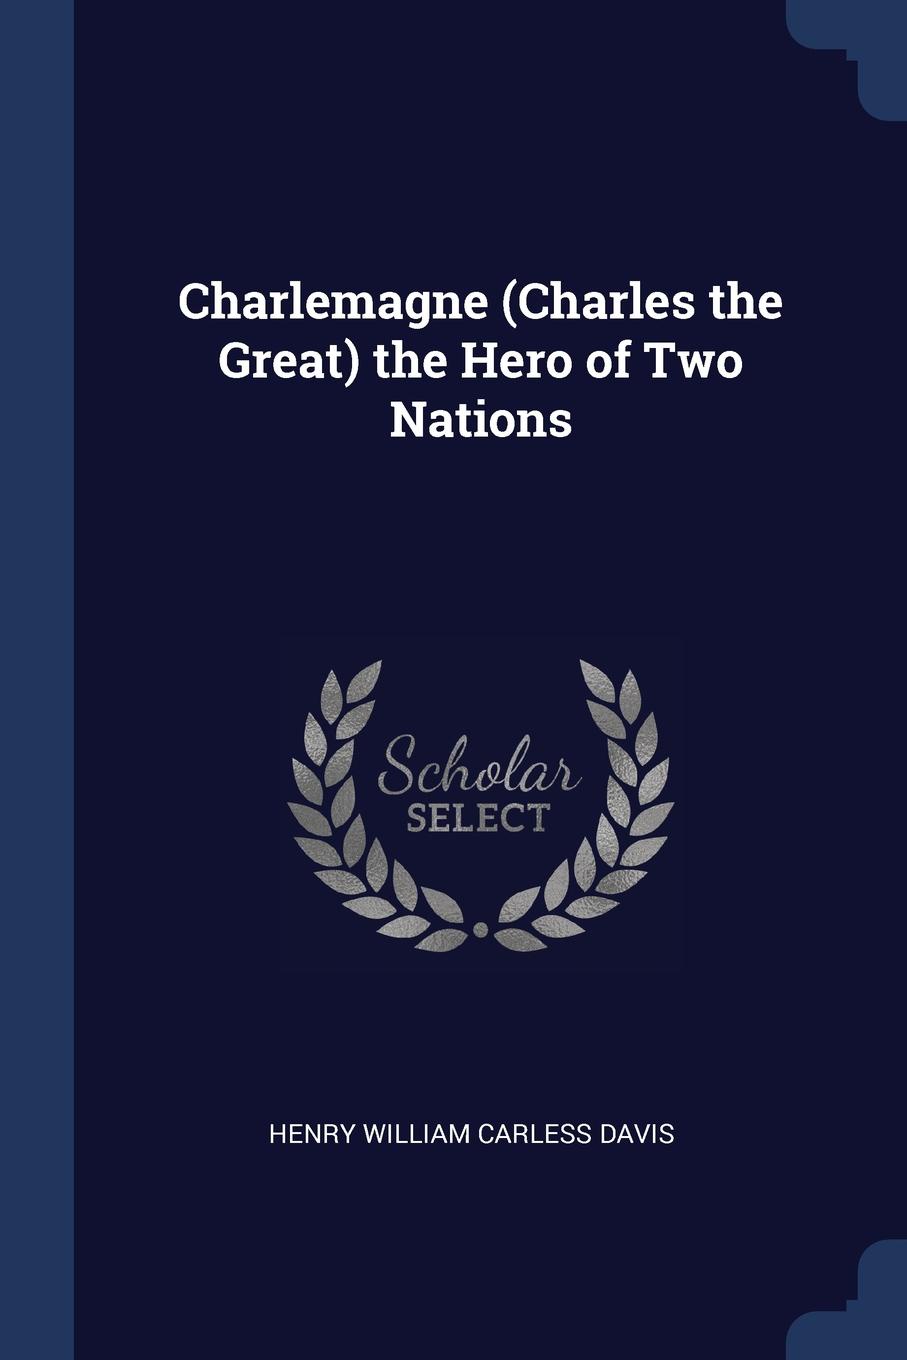 Charlemagne (Charles the Great) the Hero of Two Nations